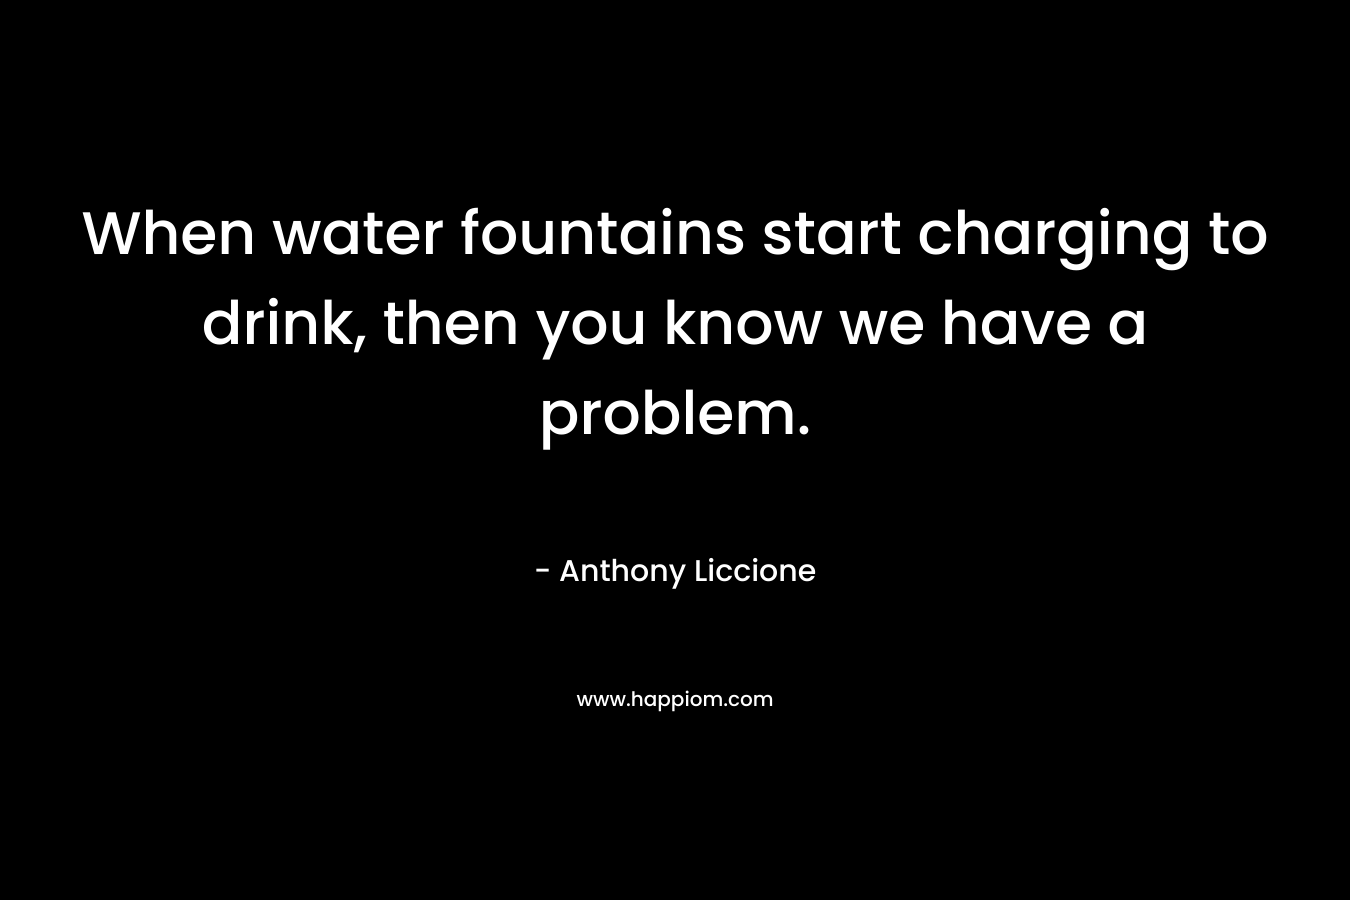 When water fountains start charging to drink, then you know we have a problem. – Anthony Liccione